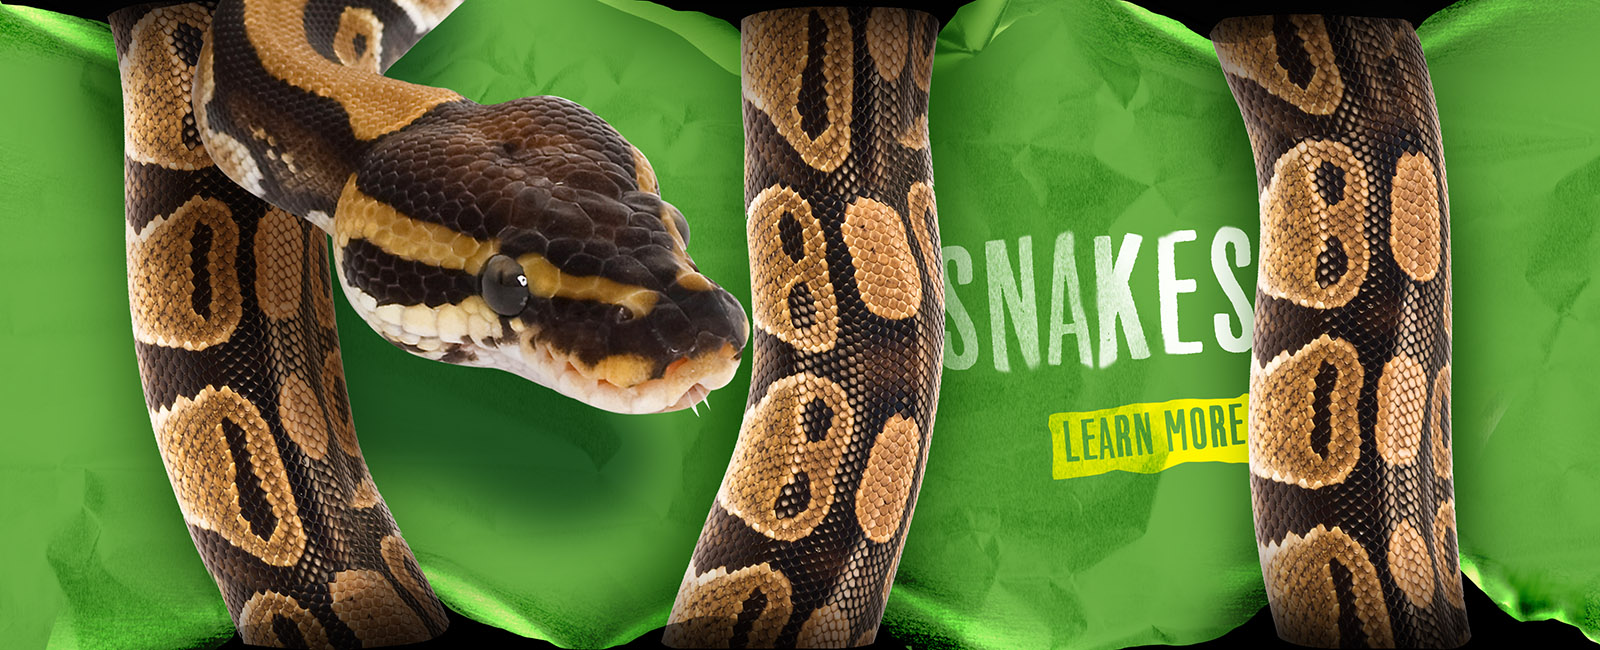 Learn about snakes at Alligator Adventure